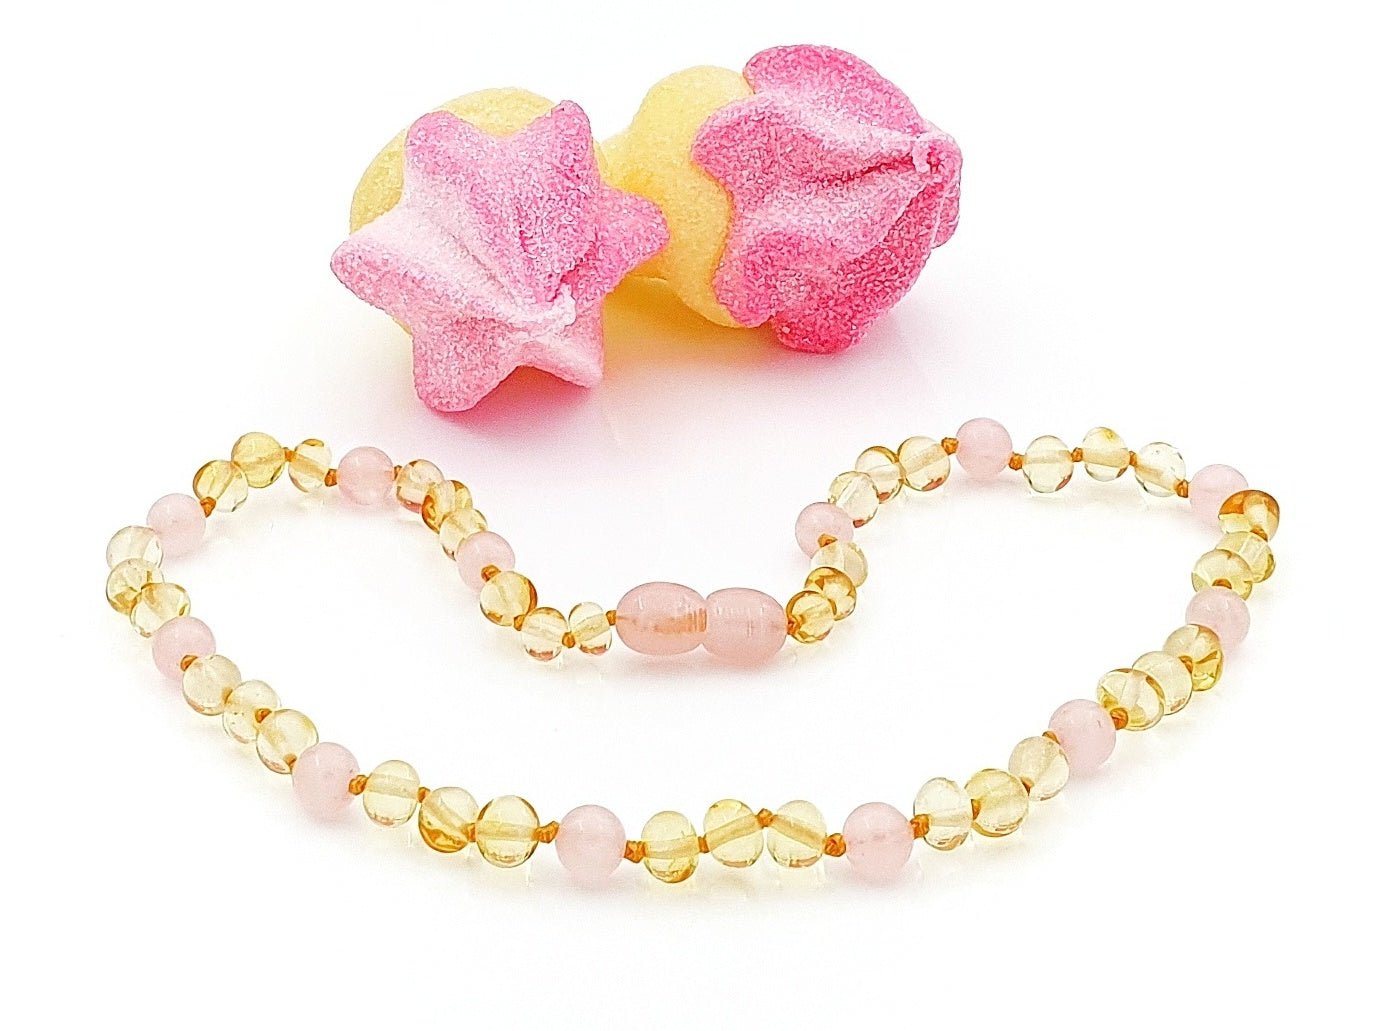 amber baby beads with pink quartz